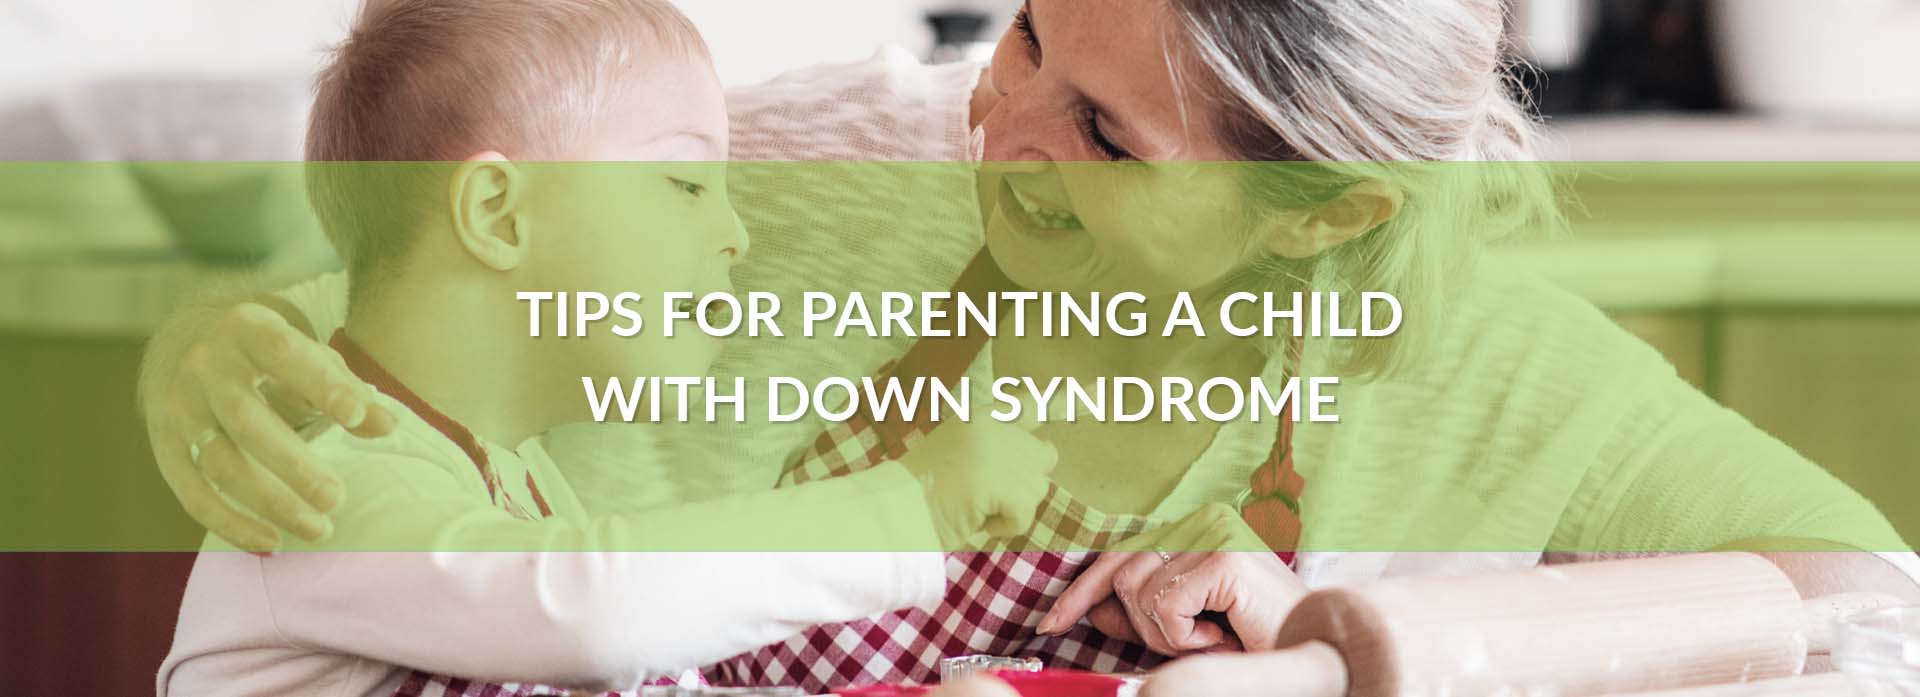 Tips for Parenting a Child with Down Syndrome